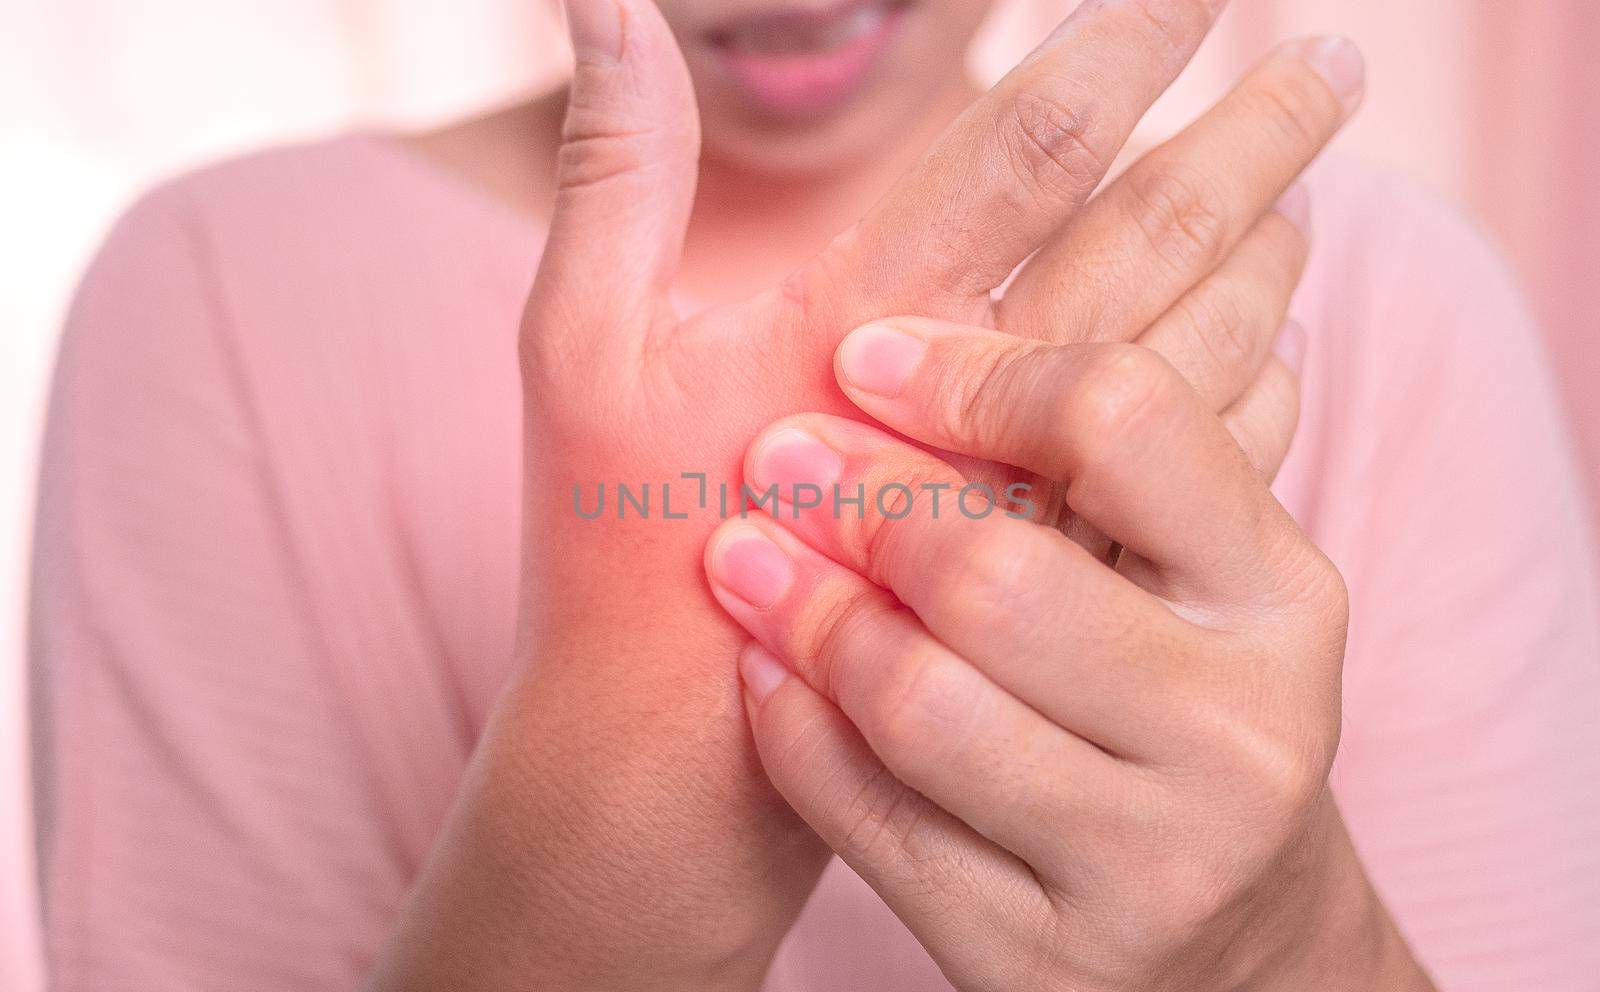 Closeup of female holding her painful palm and numbness caused by prolonged work on the computer or housewife, Carpal tunnel syndrome, arthritis. Neurological disease concept.